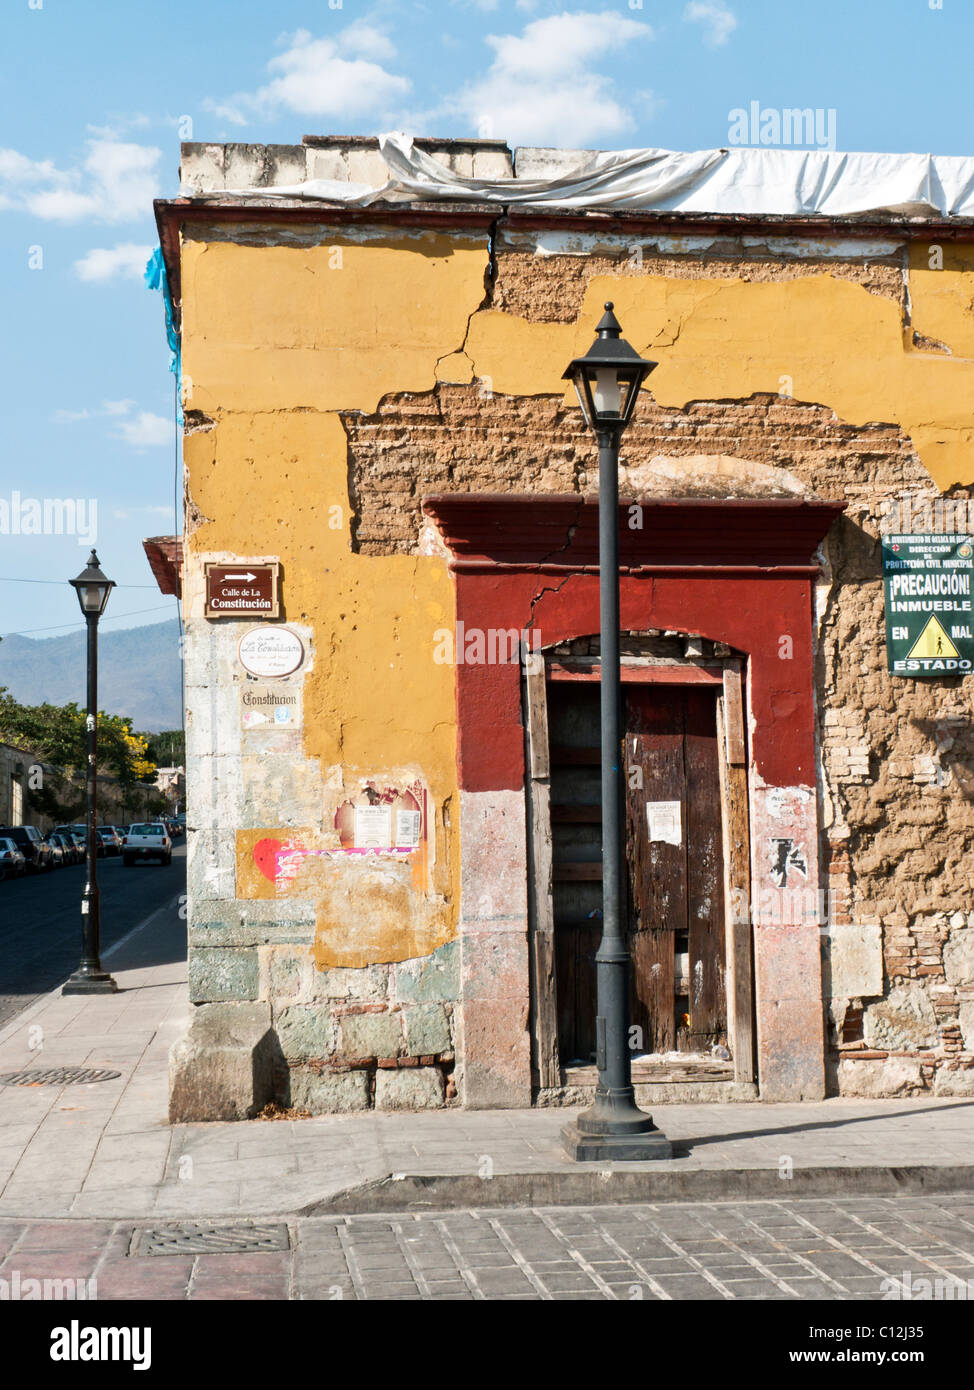 tumbledown old building for sale with yellow plaster clinging to adobe walls & posted public notice of safety hazard Oaxaca Stock Photo